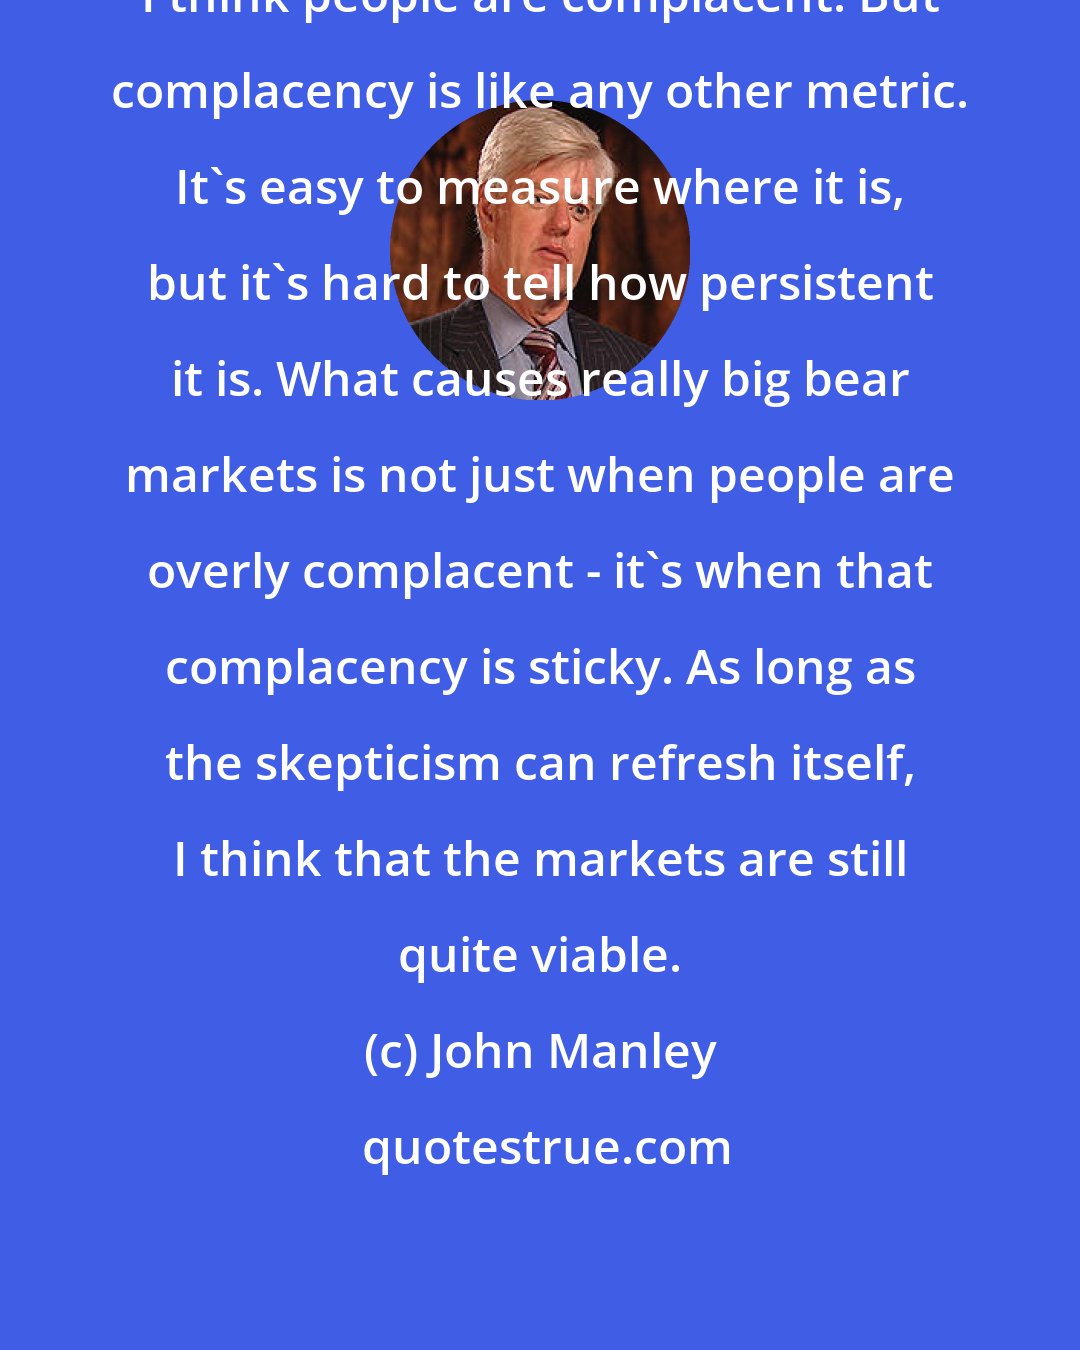 John Manley: I think people are complacent. But complacency is like any other metric. It's easy to measure where it is, but it's hard to tell how persistent it is. What causes really big bear markets is not just when people are overly complacent - it's when that complacency is sticky. As long as the skepticism can refresh itself, I think that the markets are still quite viable.